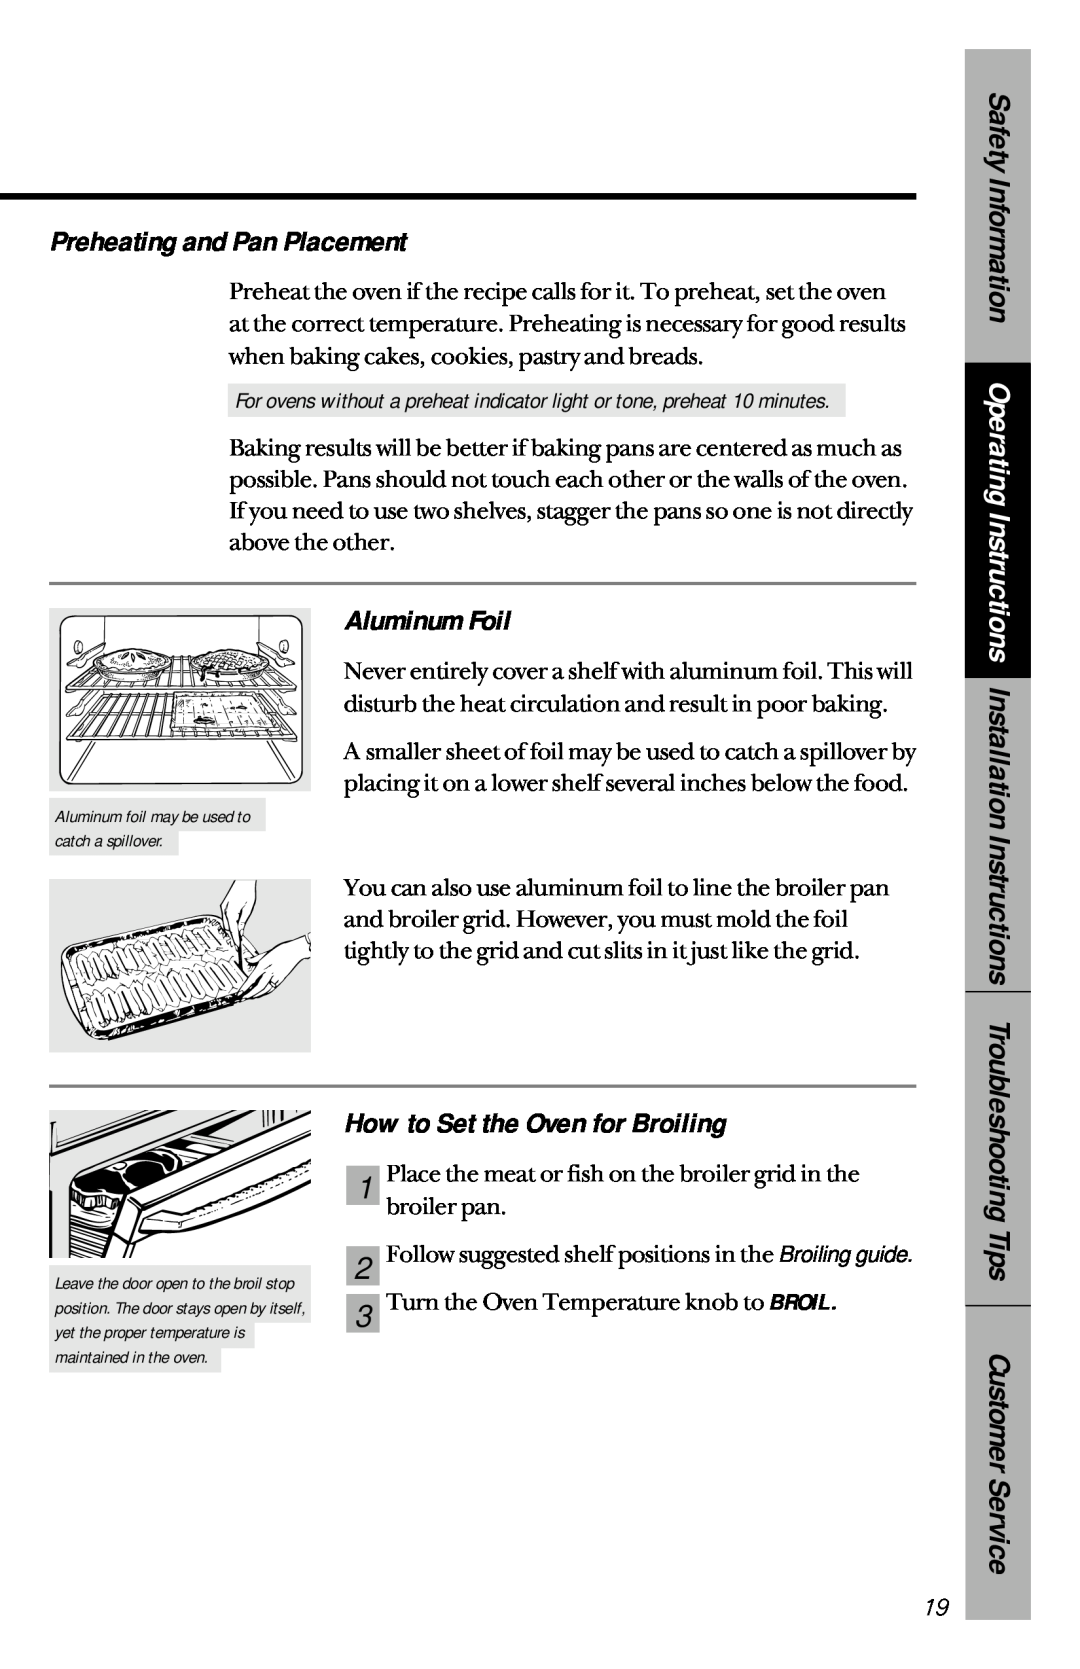 GE JBP75 Safety Information Operating Instructions Installation Instructions, Preheating and Pan Placement, Aluminum Foil 